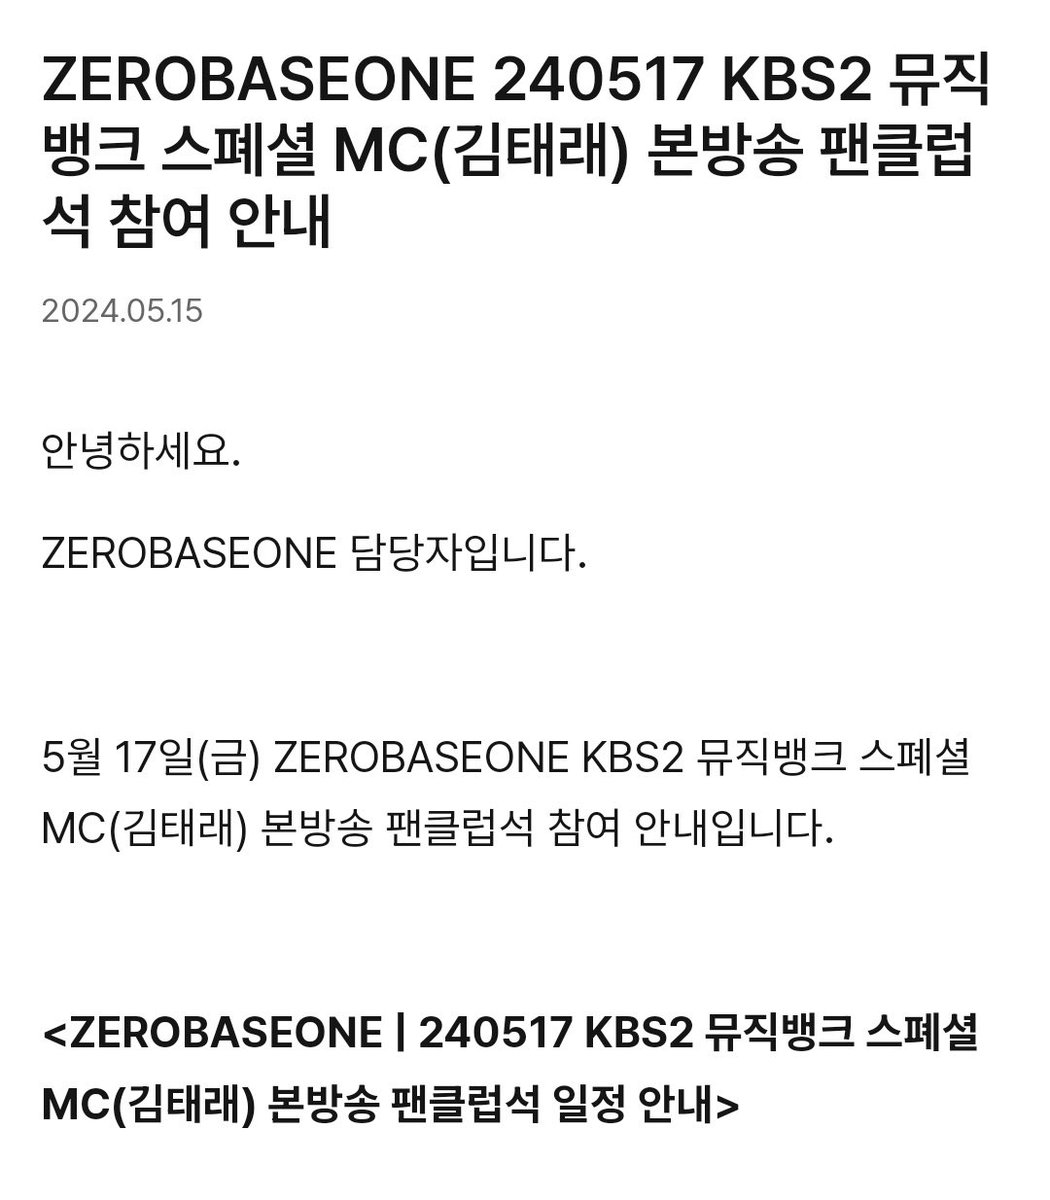 TAERAE IS GOING TO BE A SPECIAL MC FOR MUSIC BANK ON FRIDAY OMG WE ARE GOING TO GET MC TAERAE 😭😭😭 IM GOING TO CRY 😭😭 IM BEYOND PROUD OF HIM 😭😭